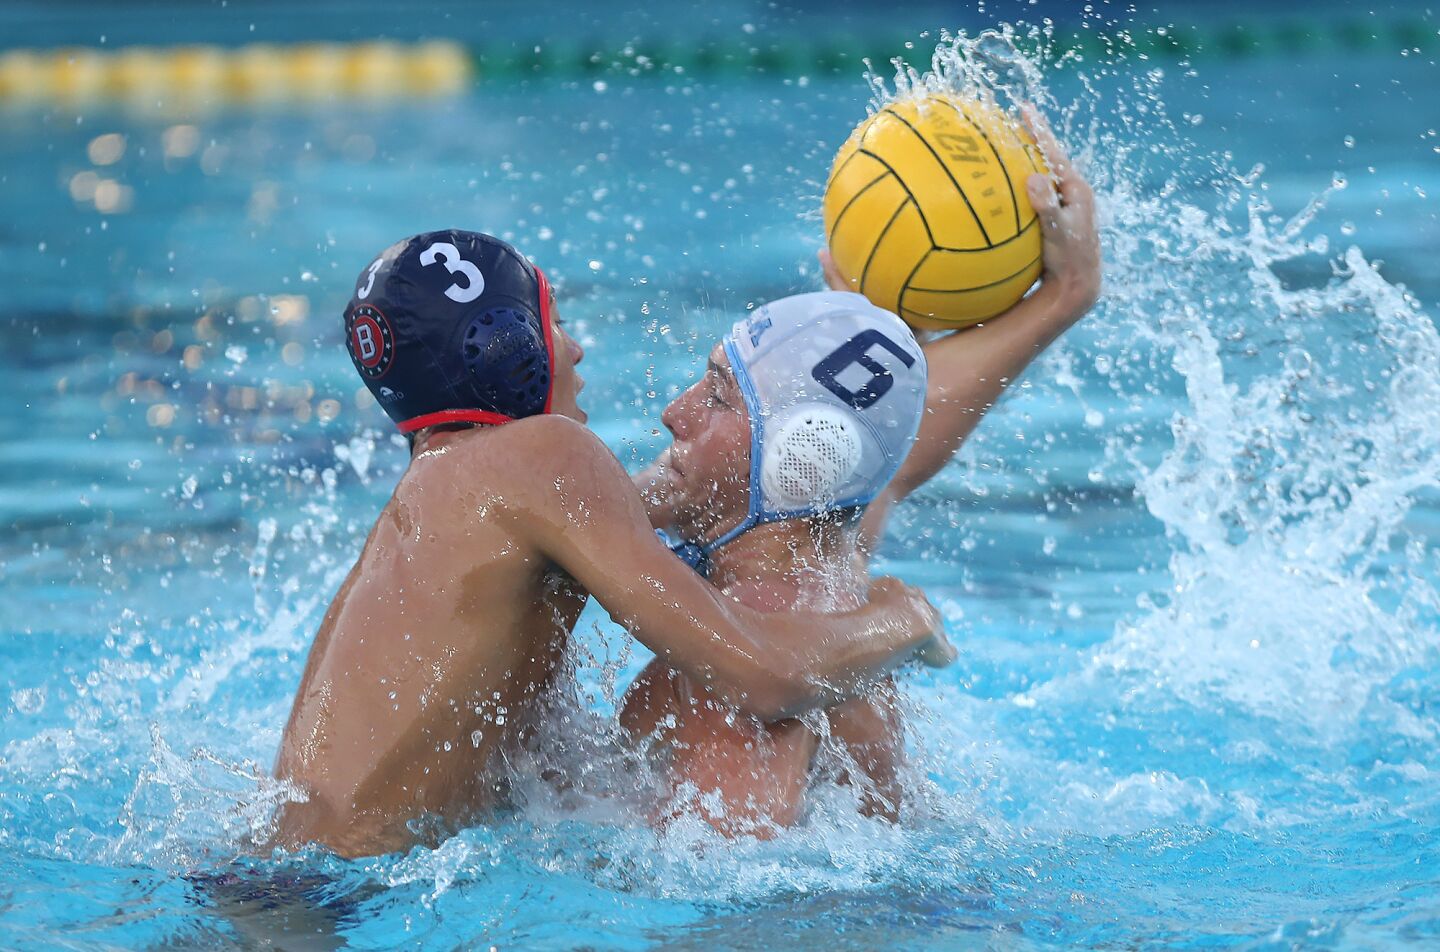 Beckman High's Keanu Pascual (3) disrupts a shot by Corona Del Mar High's Matt Ueberroth in front of the net during wild-card round of the CIF Southern Section Division 2 playoffs at Beckman on Tuesday.